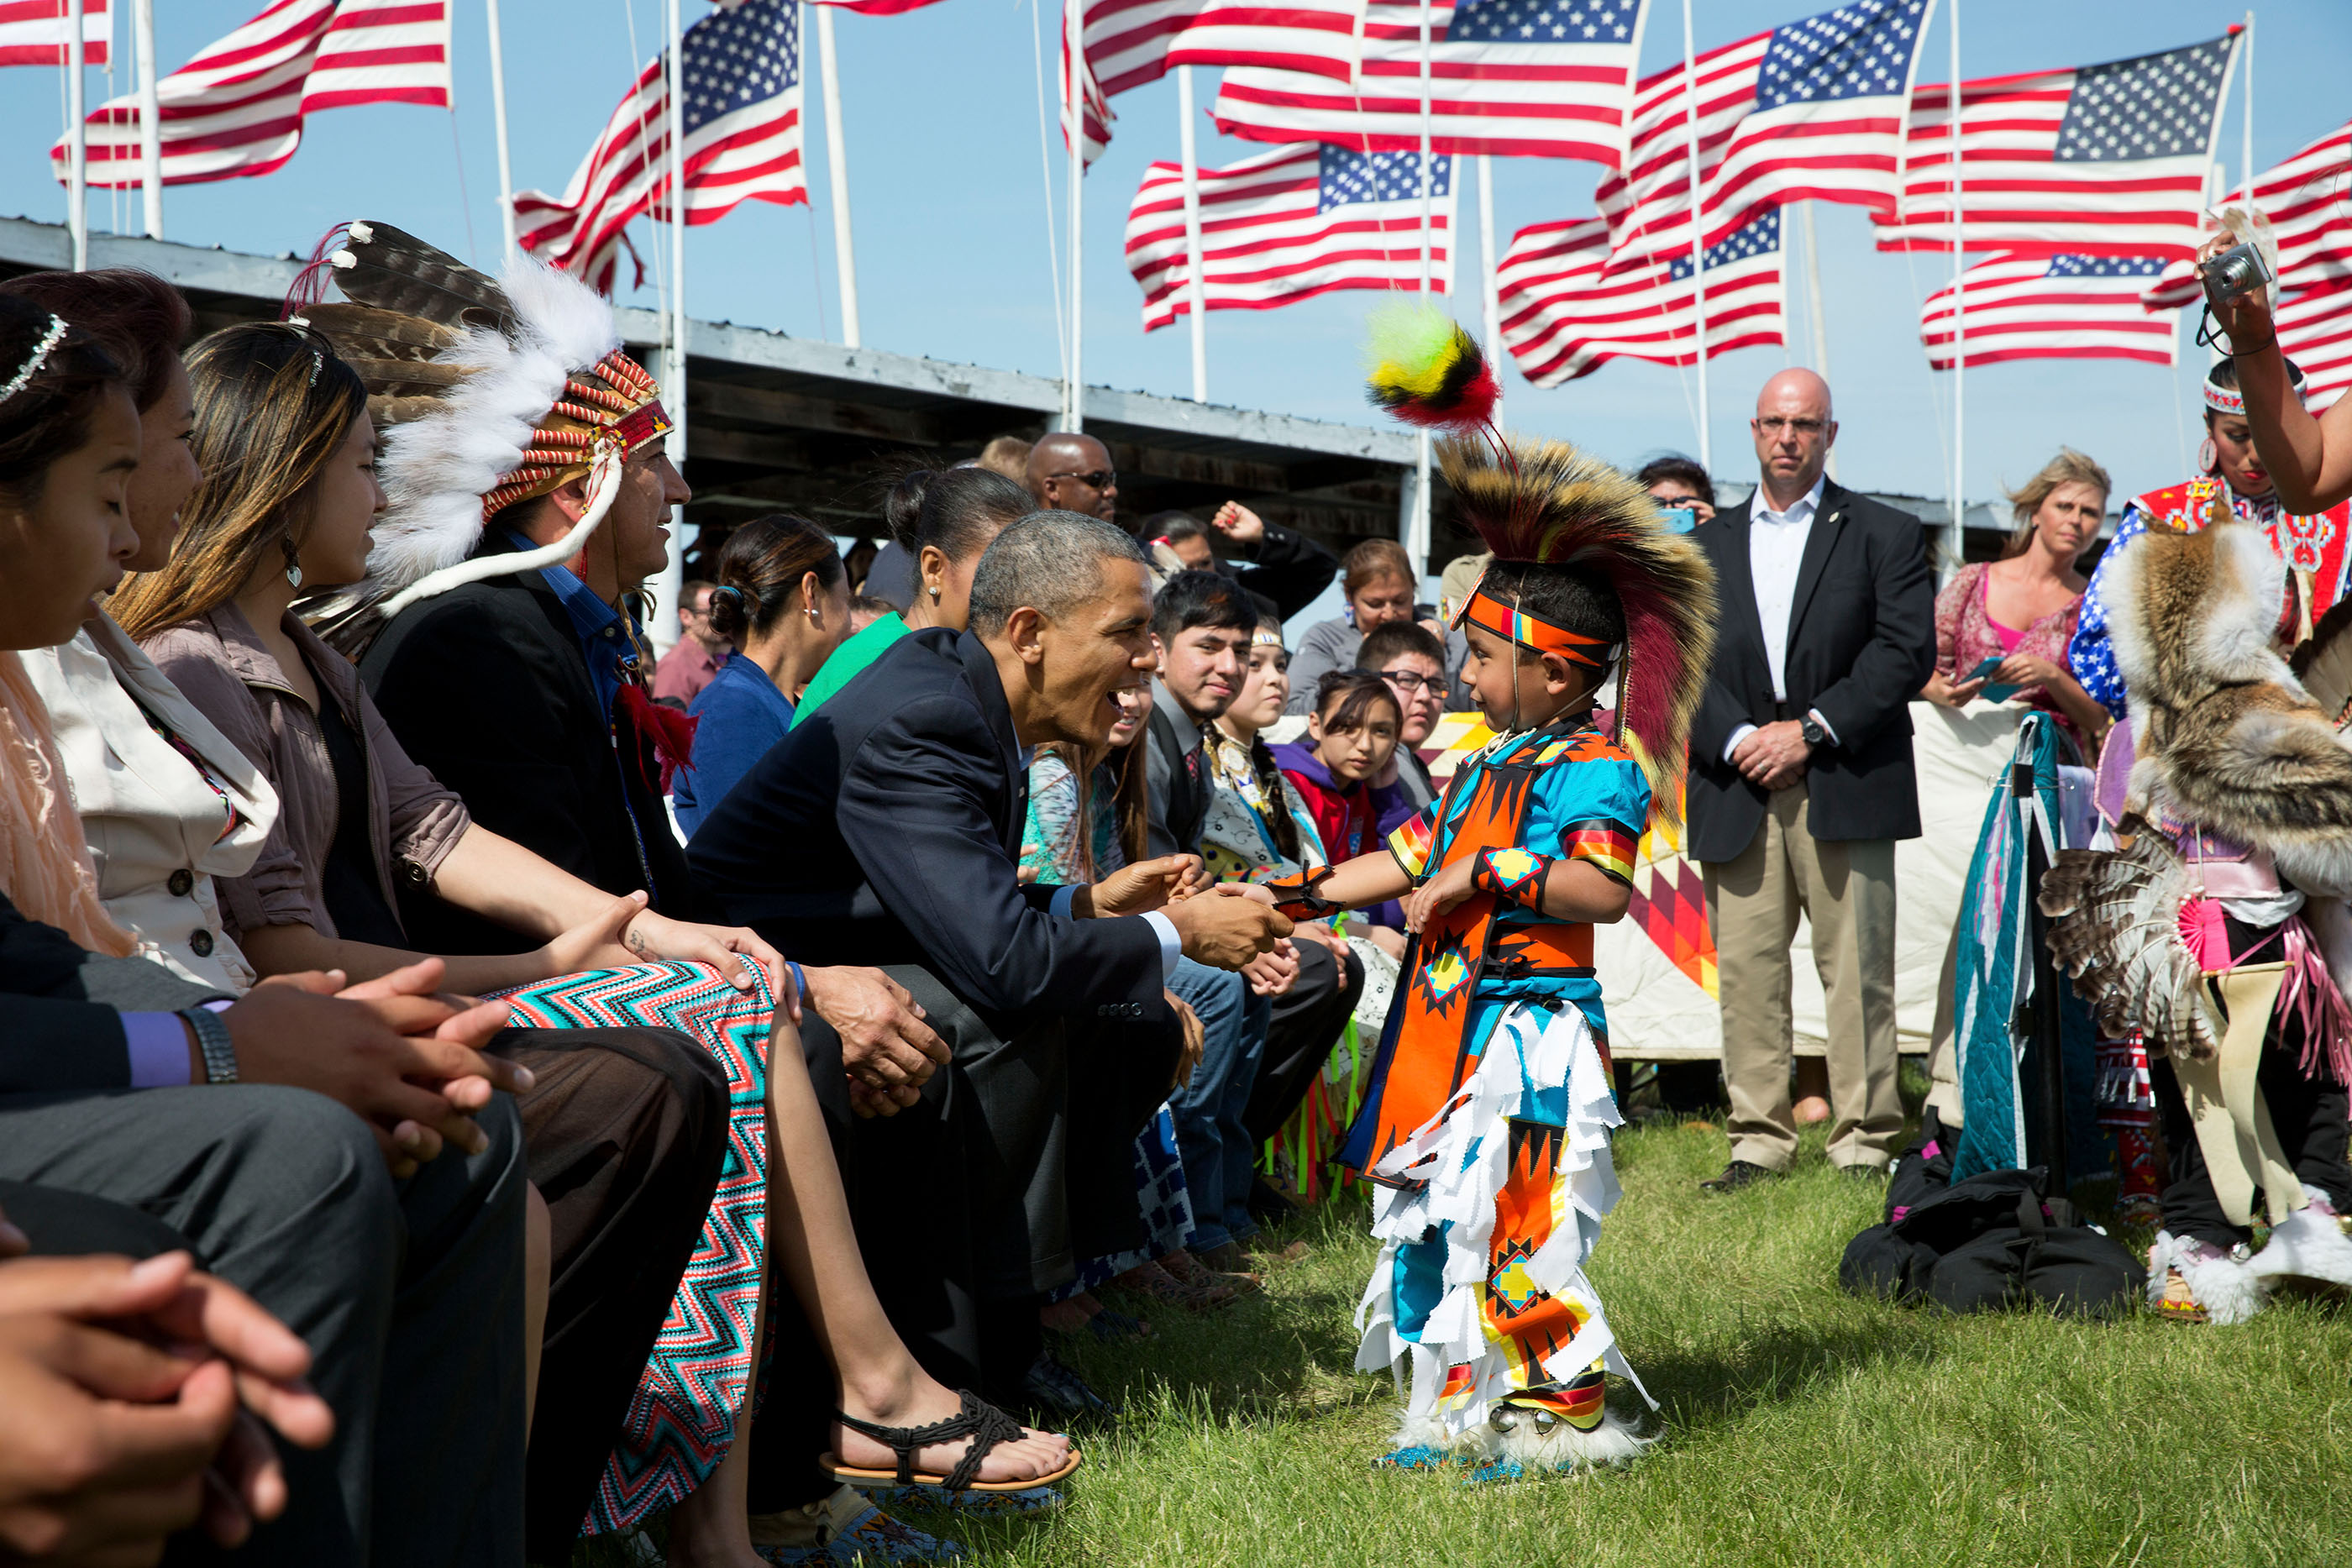 North Dakota, June 13, 2014. Greeting a young boy during a Flag Day celebration at the Standing Rock Sioux Tribe Reservation in Cannon Ball. (Official White House Photo by Pete Souza)